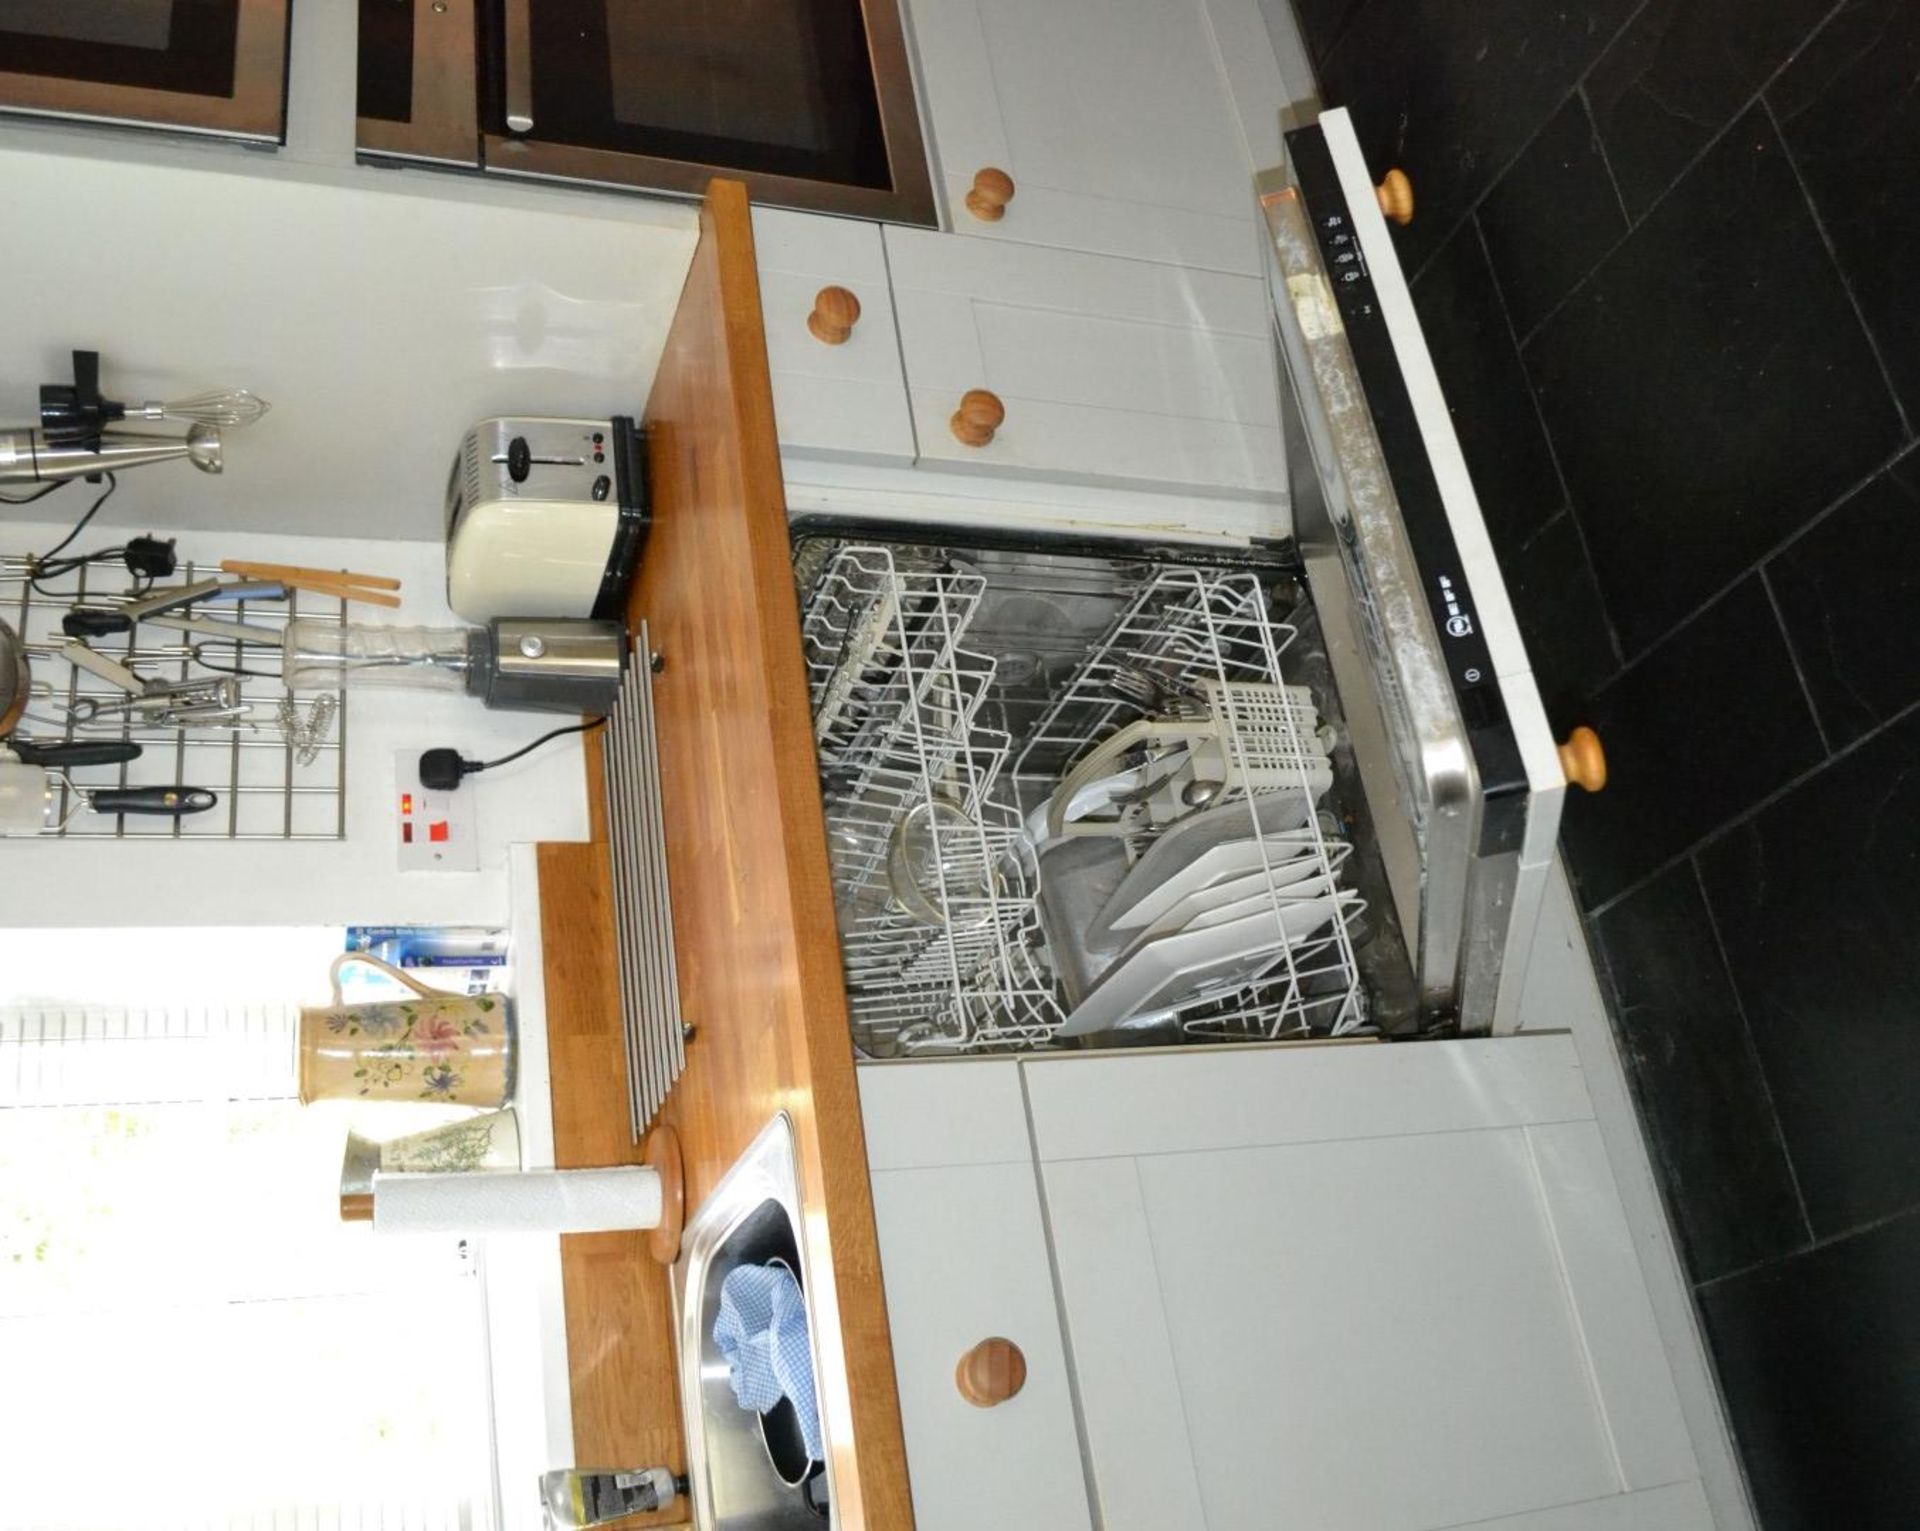 1 x Large Bespoke Fitted Kitchen With Neff Appliances - CL321 - Location: - Image 35 of 59